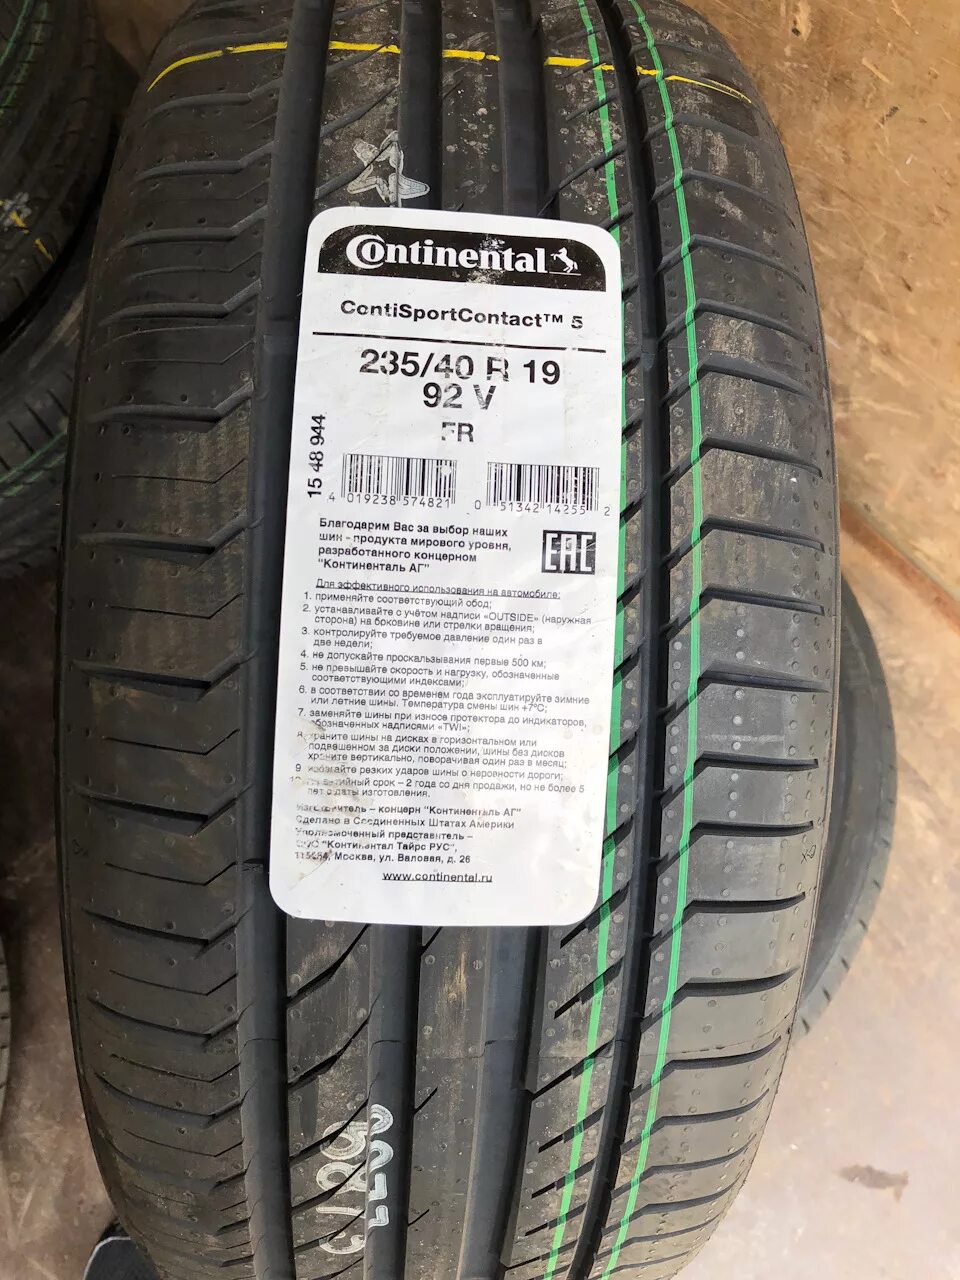 Continental CONTISPORTCONTACT 5 r19. 235-60 R18 Continental CONTISPORTCONTACT 5 fr. Continental 235/40 r19. Continental SPORTCONTACT 5.